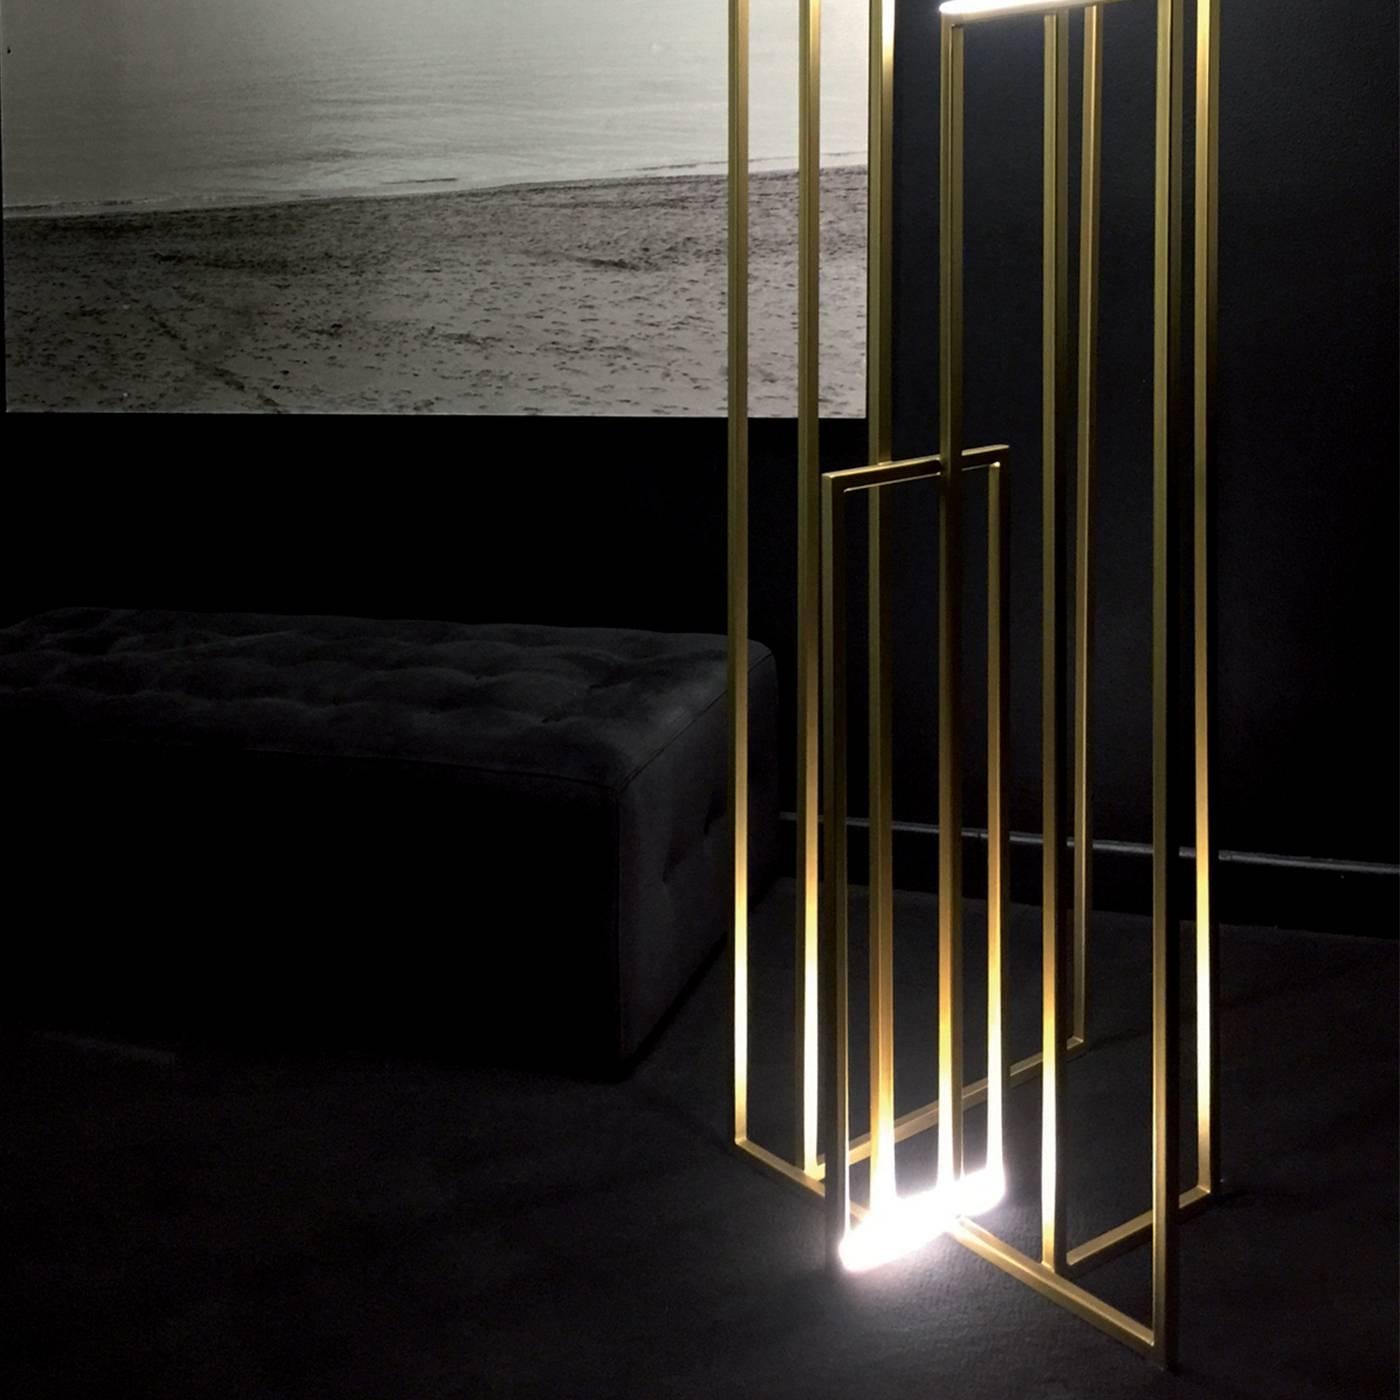 Other Contemporary 'Lightframe' Floor Lamp with an Unique Design